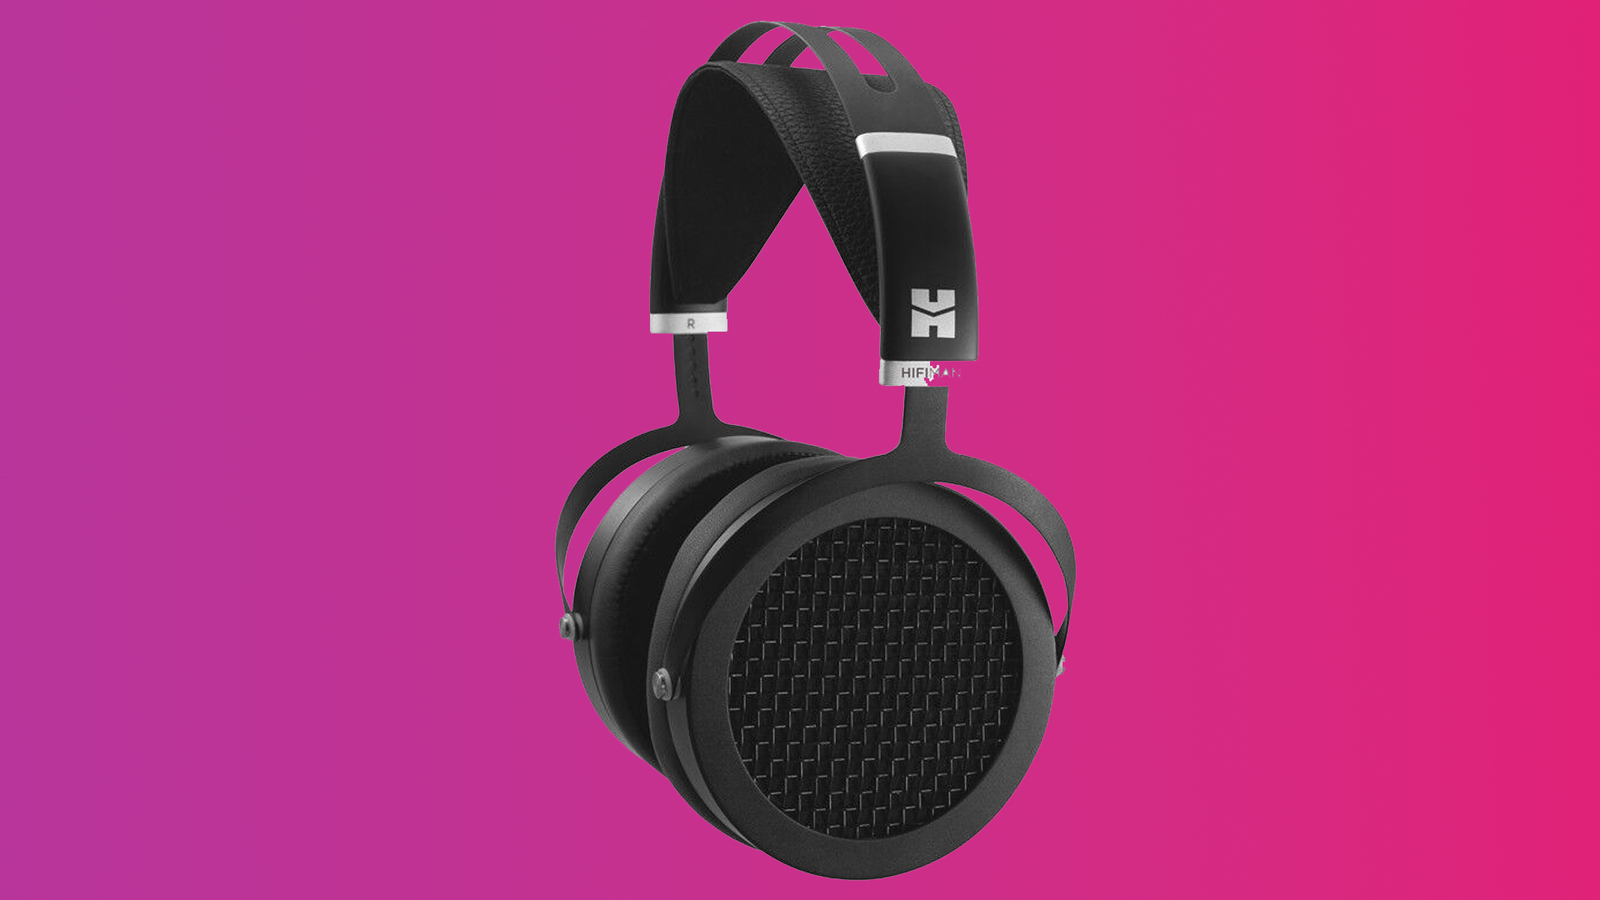 Grab these HifiMan Sundara headphones for £269 from Hifi Madness'   store with a code